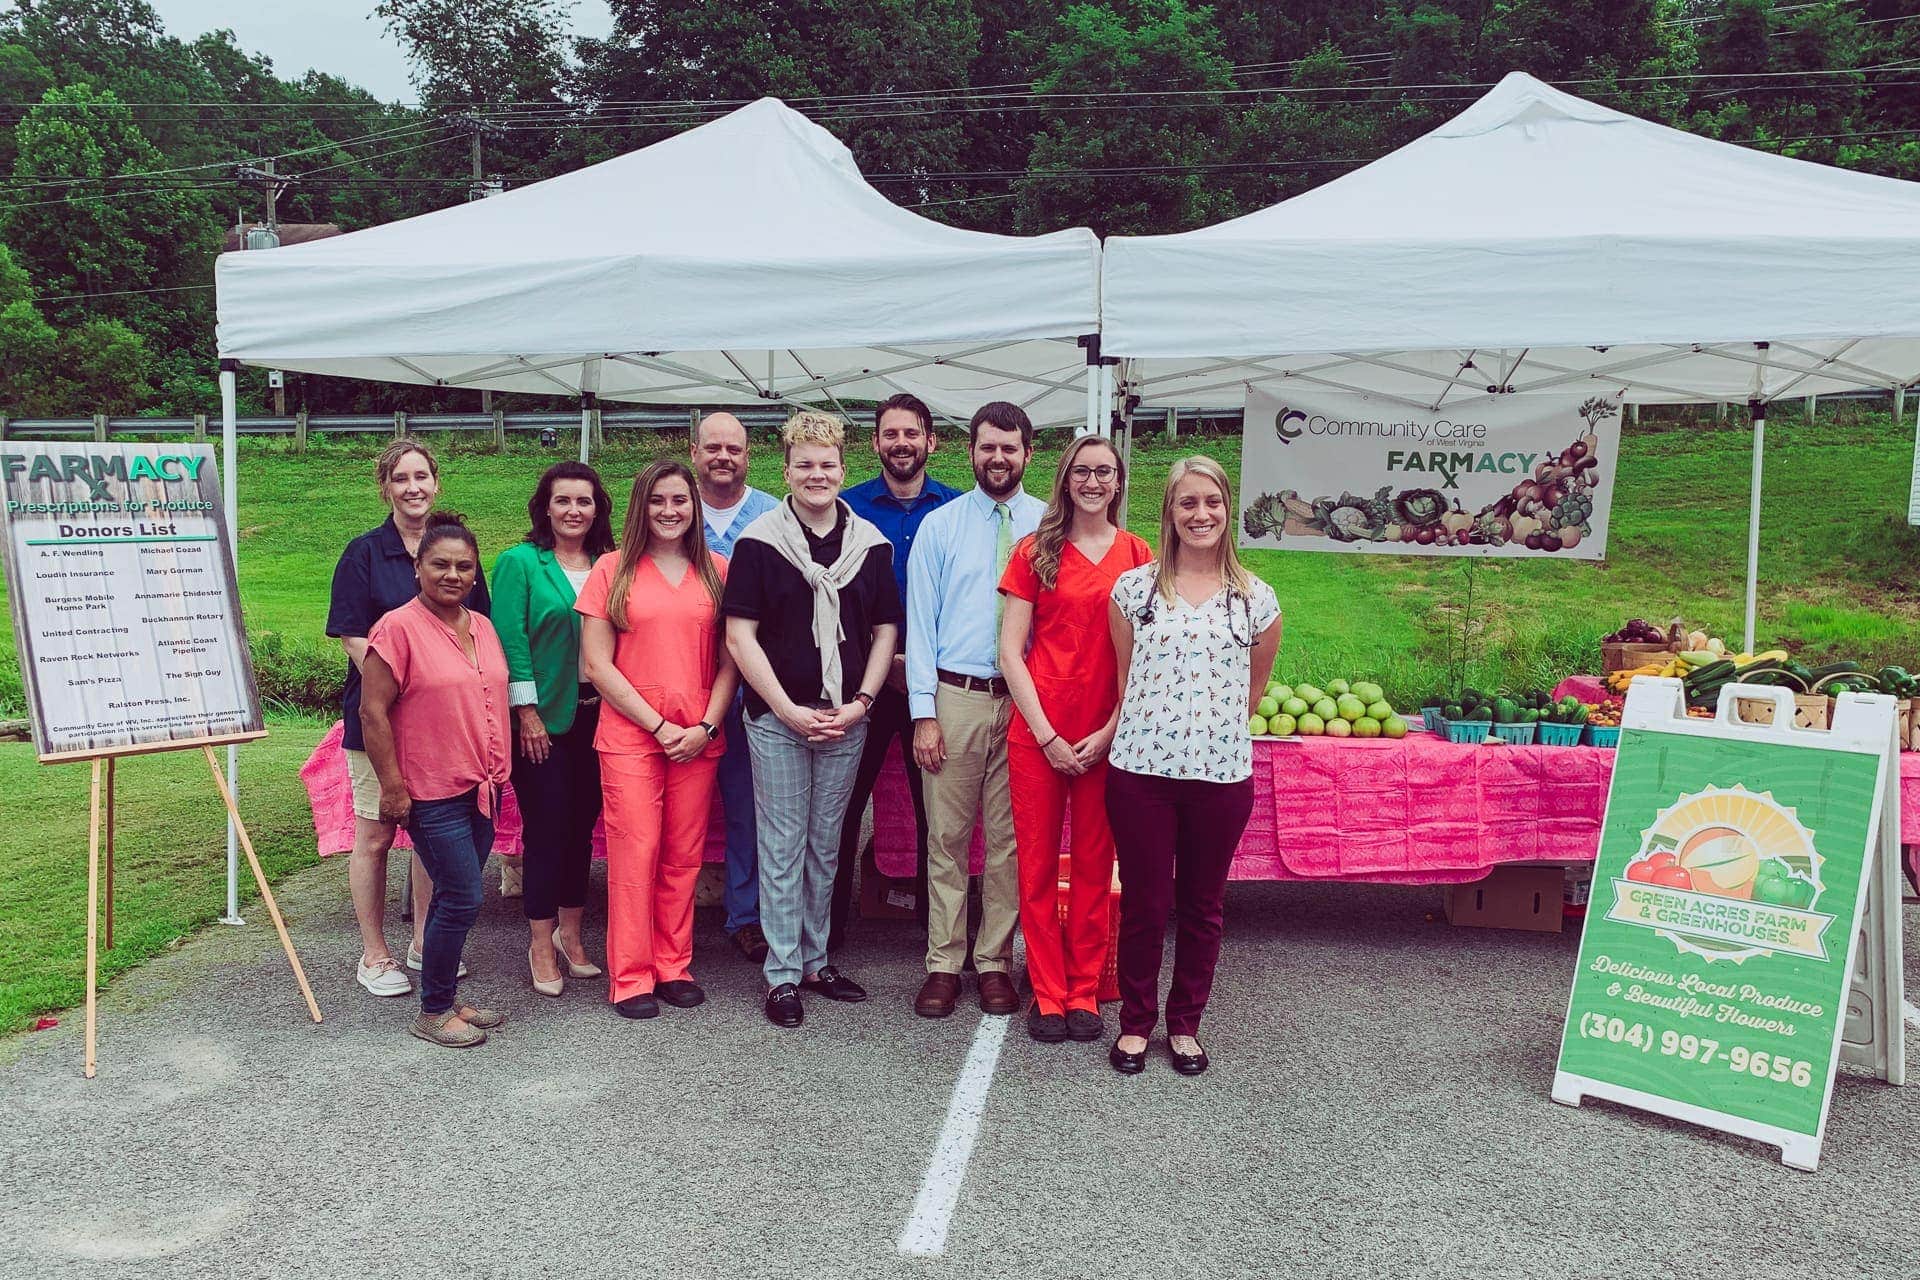 Pictured left to right: Becky Kniley, WVU Extension Agent, Pati Espinosa, Green Acres Farm, and CCWV staff members, Nicole Warren, Kelsey Burgess, Sean Barnett, PA-C, Trevor Haddix, Joshua Dunn, PharmD, Nathaniel Linger, MD, Lisa Fidler, and Jenna Ward, PA-C.